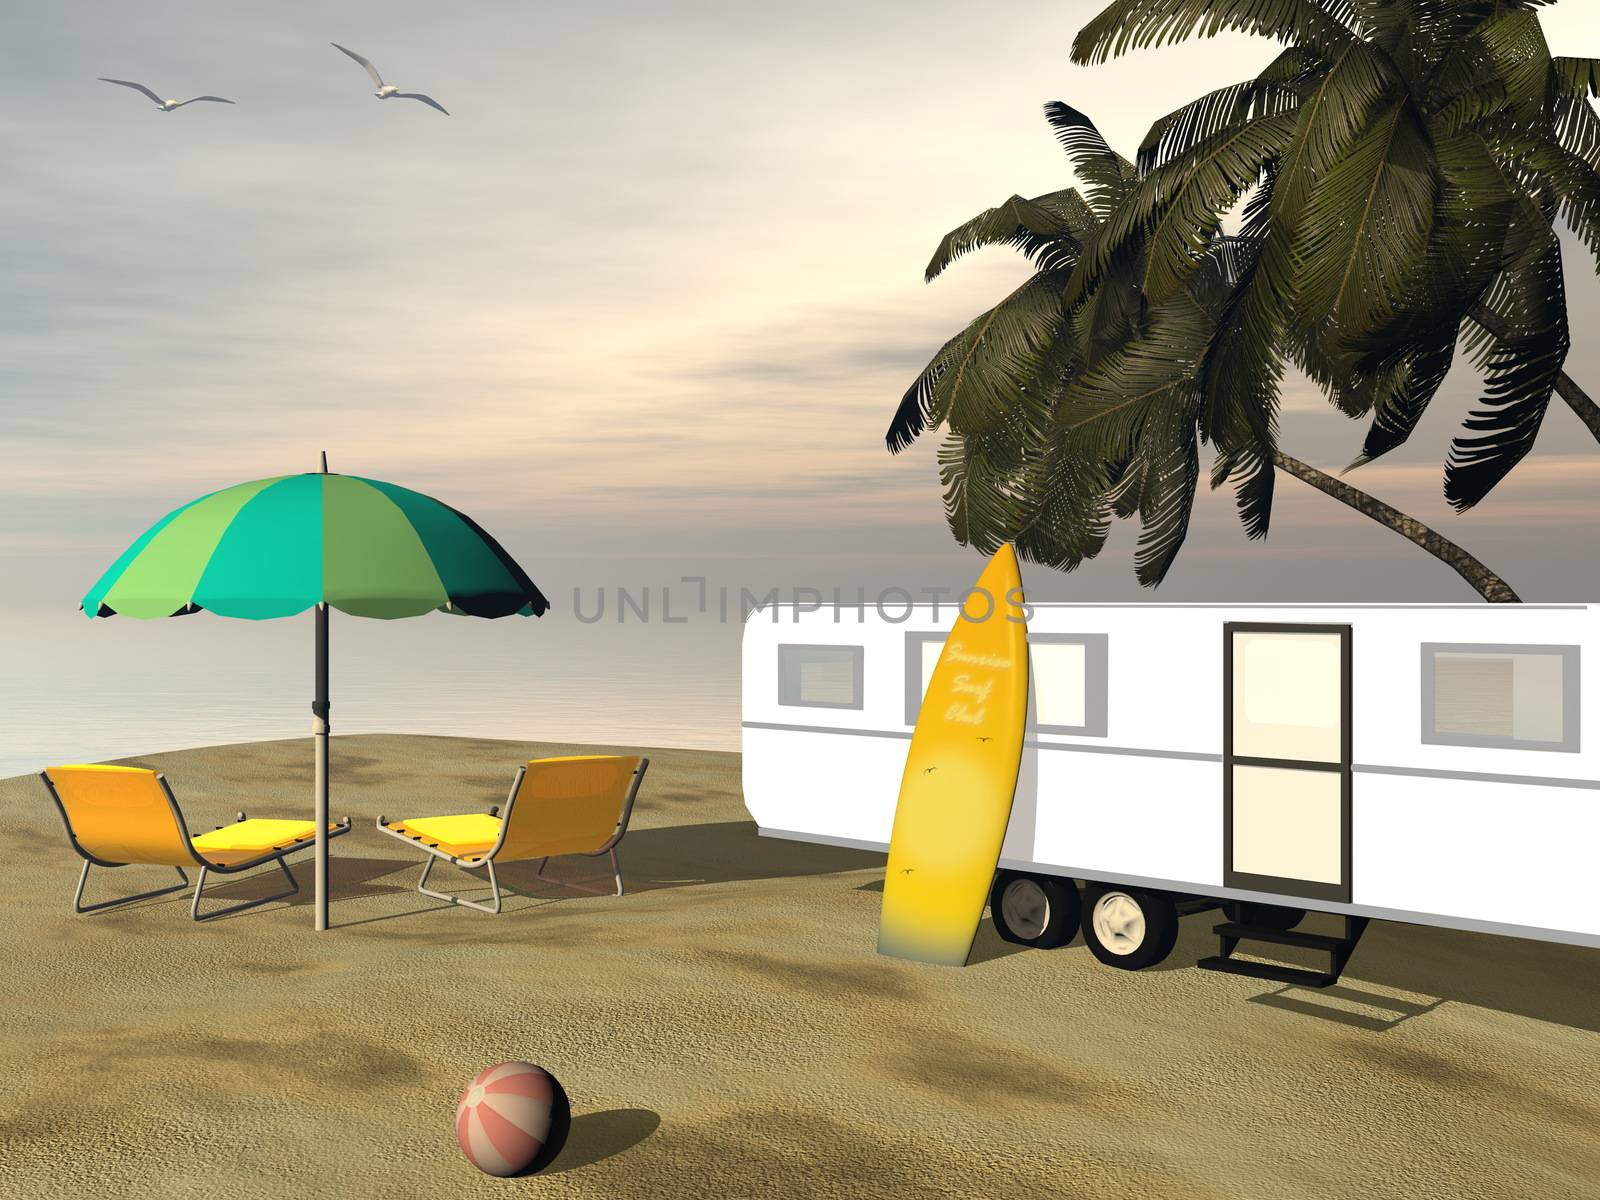 Caravan holidays at the beach, relaxing and surfing - 3D render